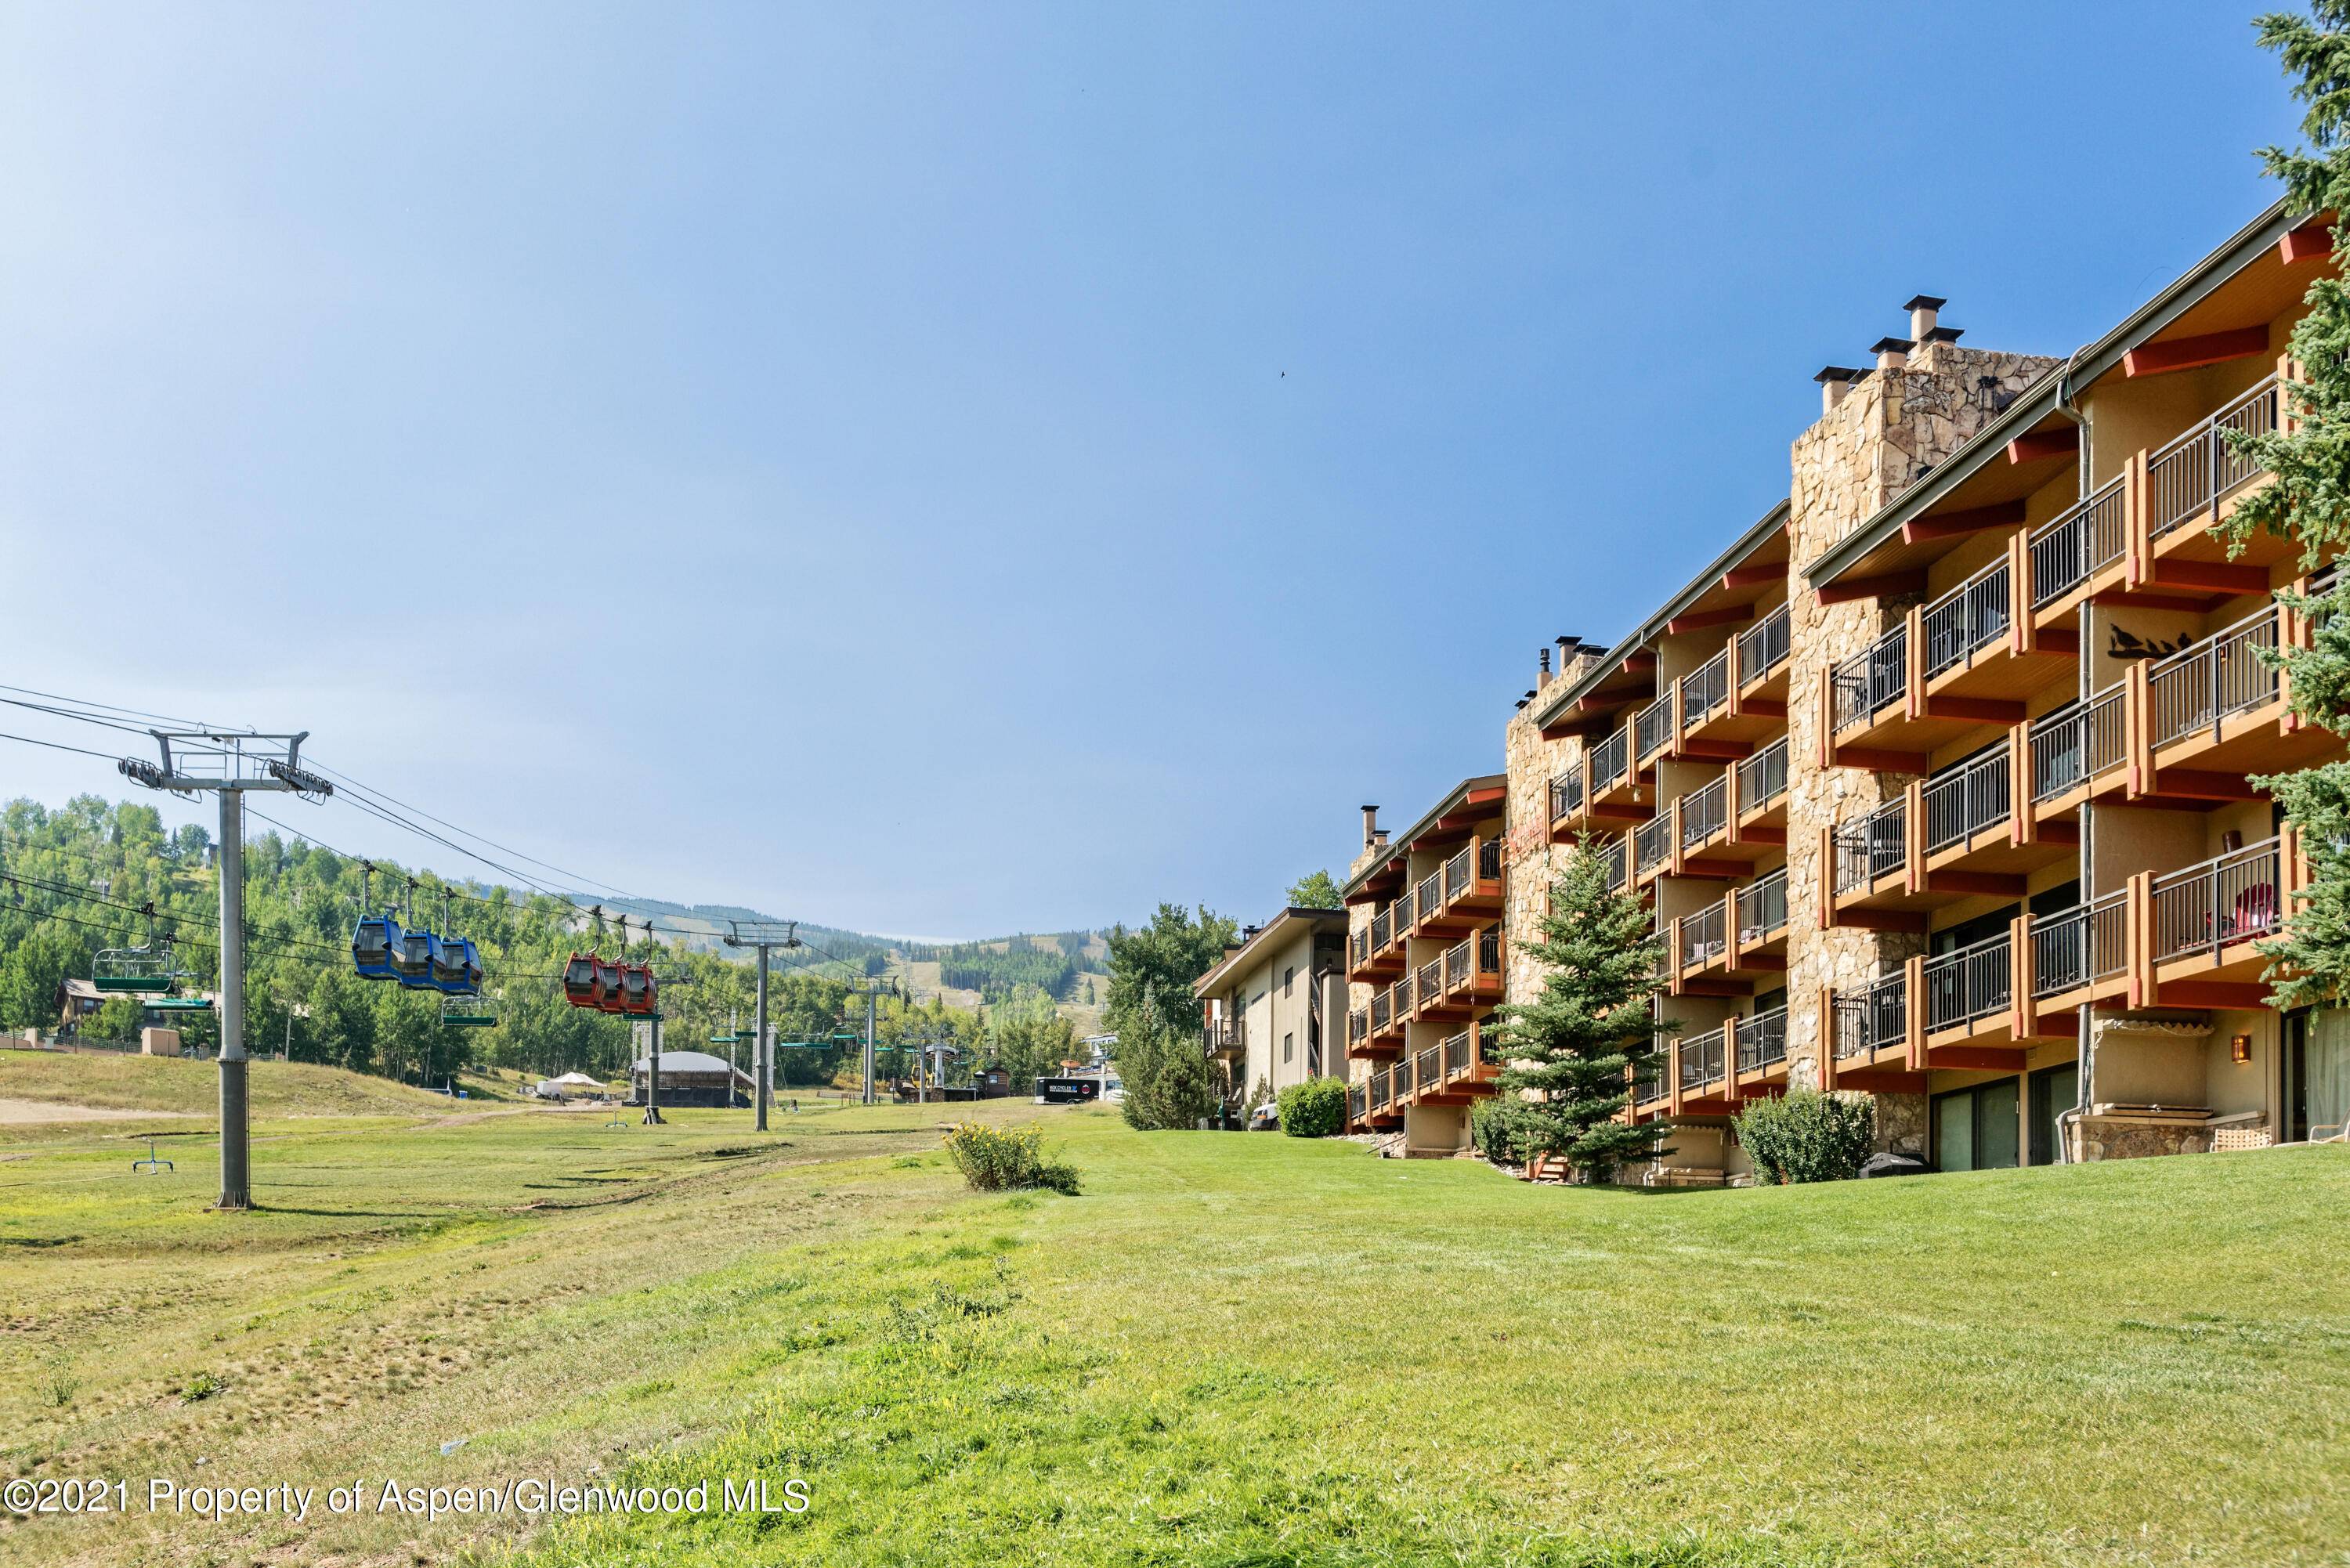 Located only steps from the Snowmass ski resort, this condo is conveniently located so you can enjoy all of your favorite outdoor adventures right out your door.